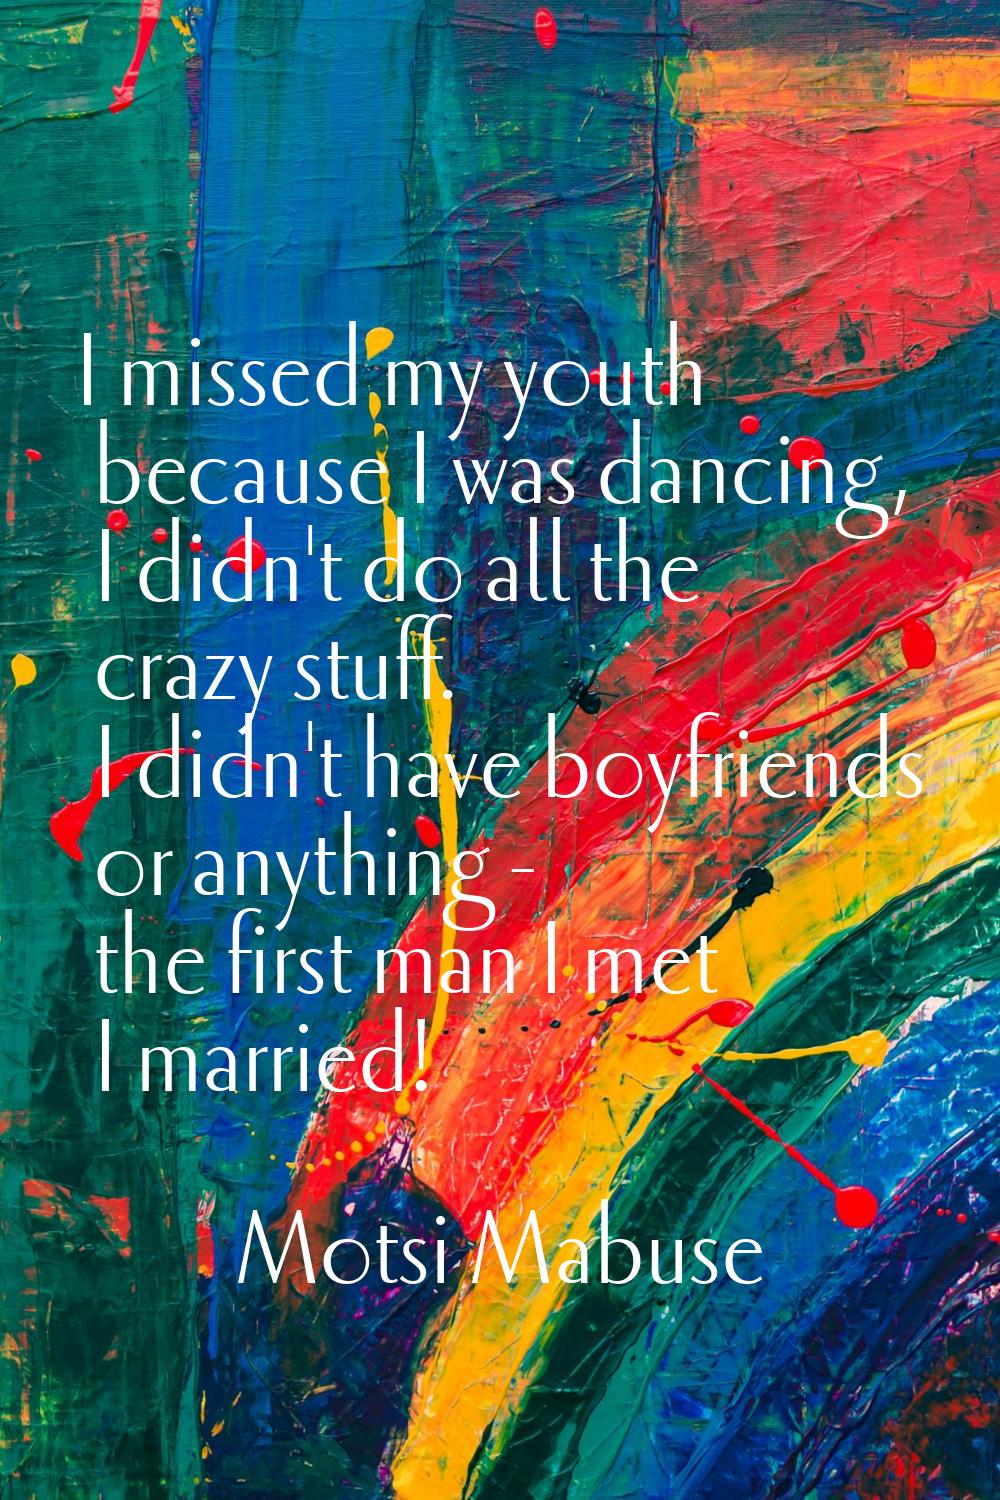 I missed my youth because I was dancing, I didn't do all the crazy stuff. I didn't have boyfriends 